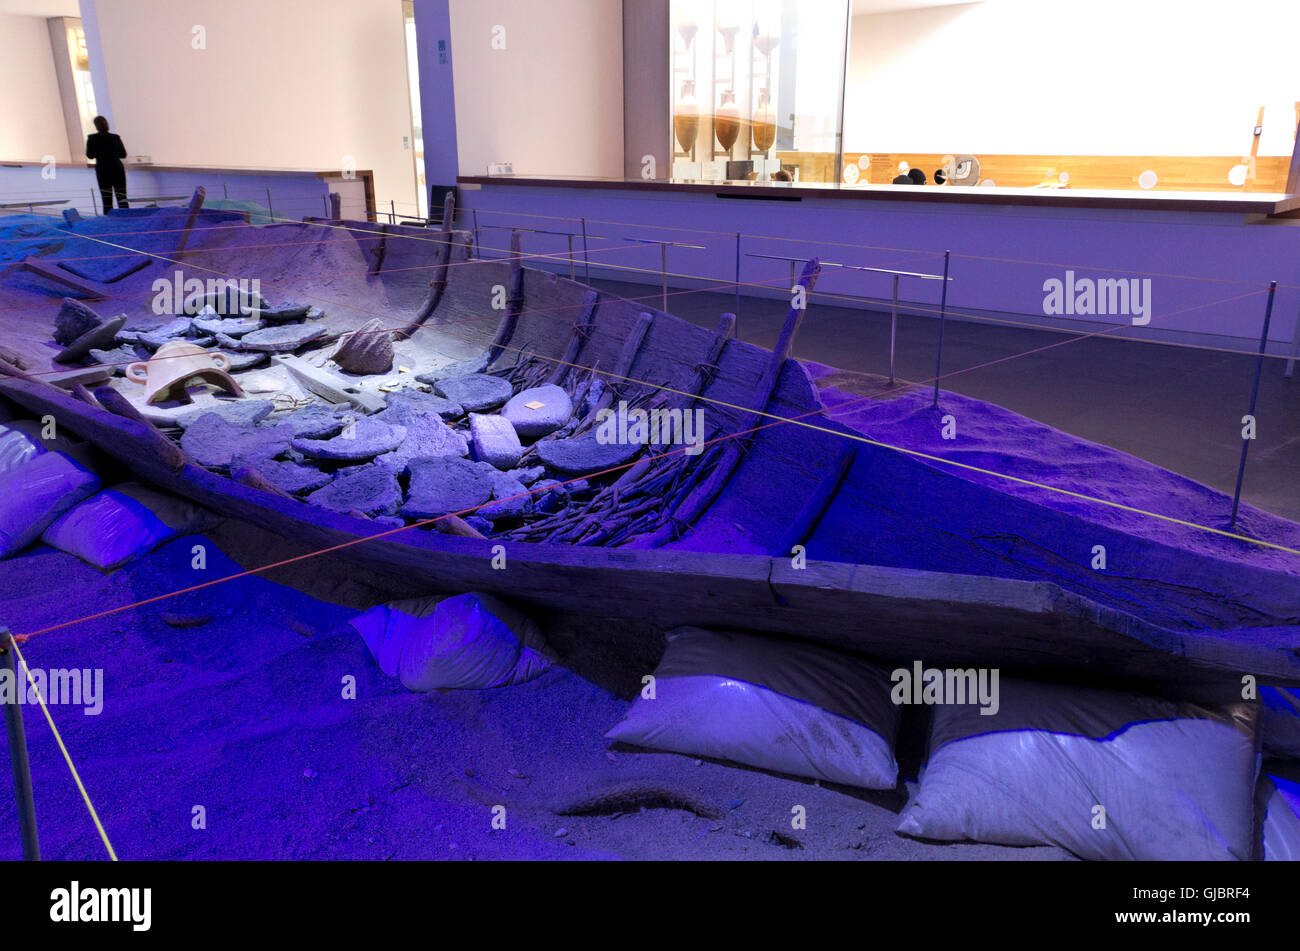 Underwater Archeology museum, remains of Phoenician shipwreck vessel Mazarron 2, displayed under protective blue light. Stock Photo